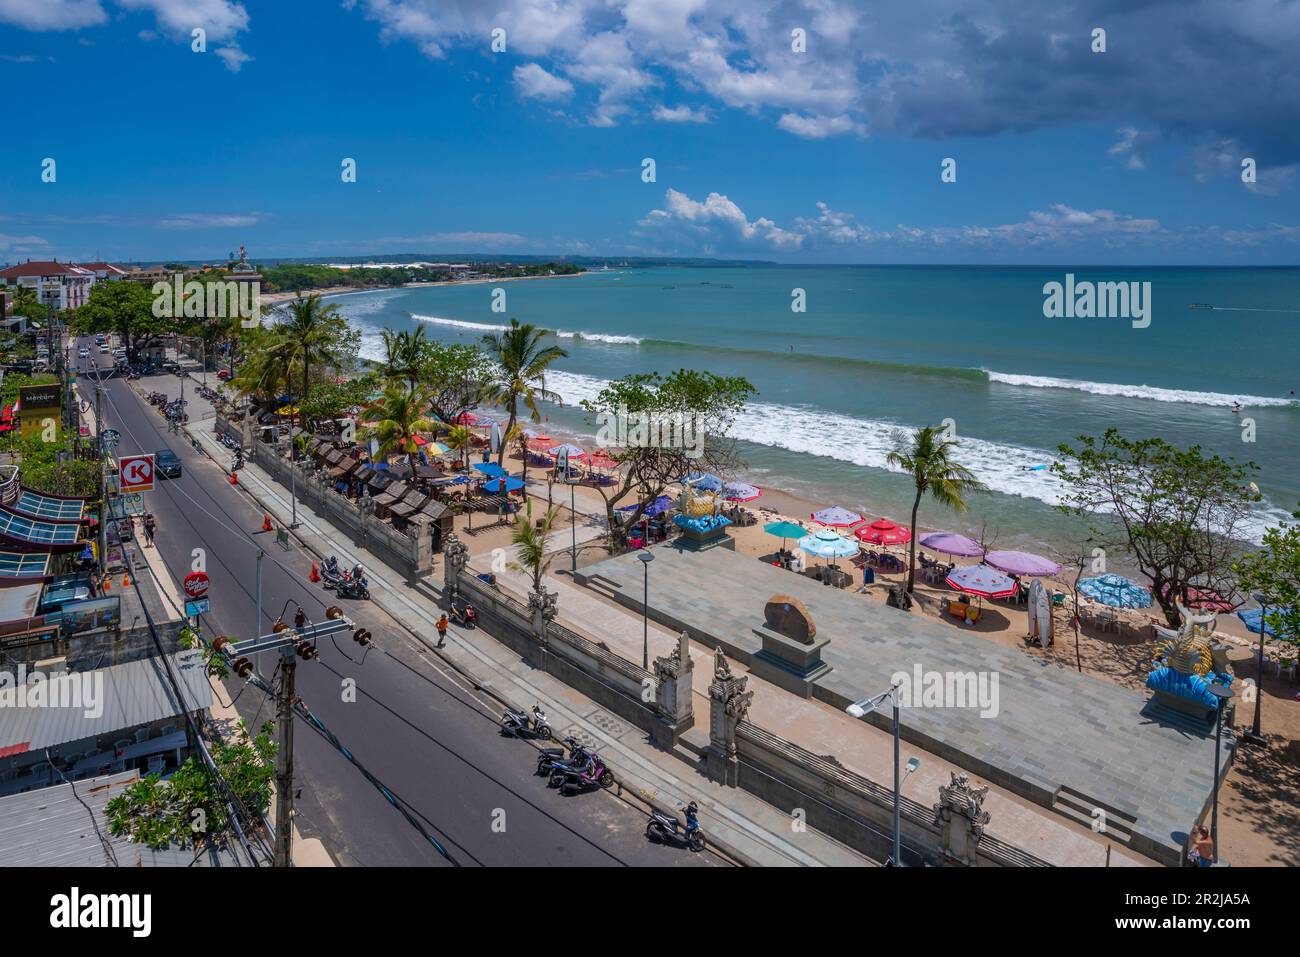 View of Kuta Beach and sea from hotel rooftop, Kuta, Bali, Indonesia, South East Asia, Asia Stock Photo